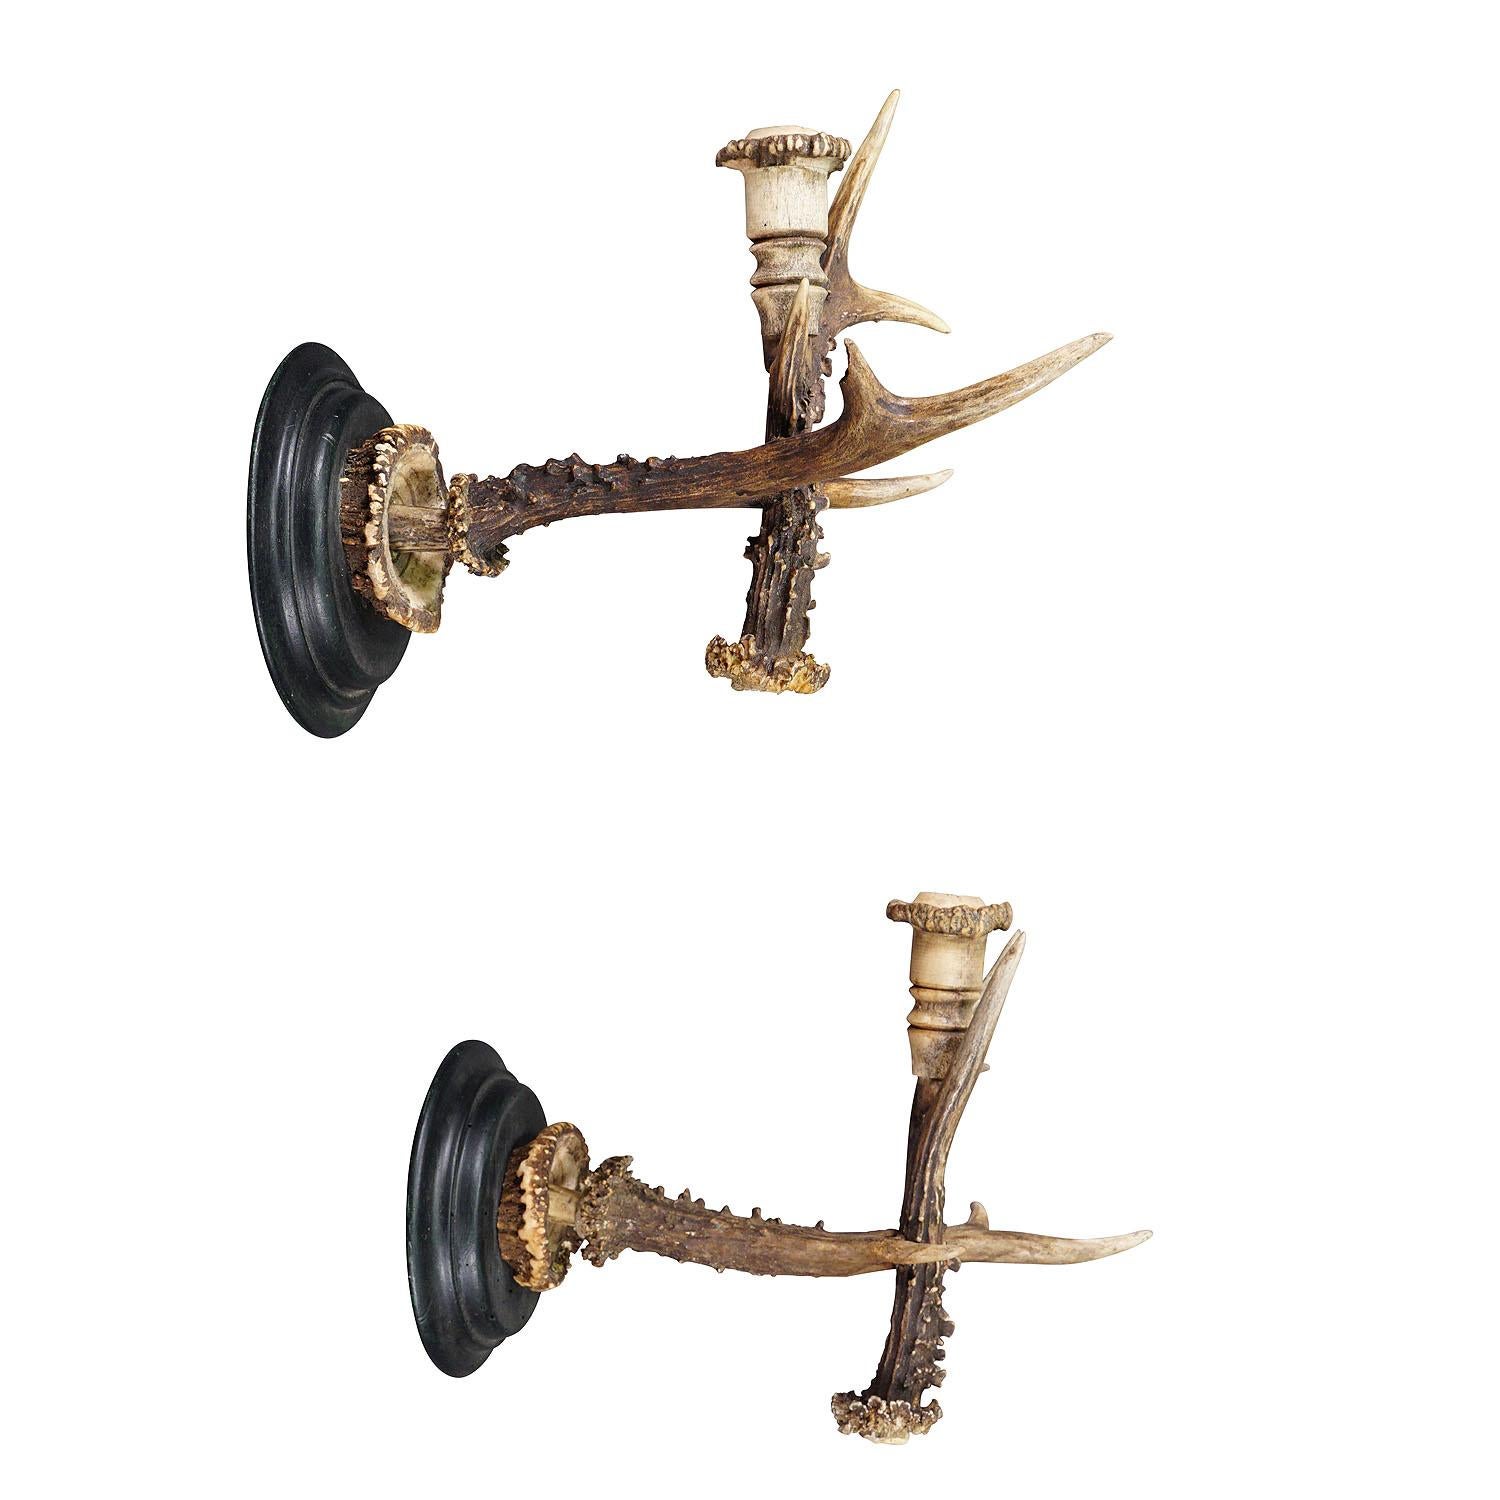 A Pair Great Black Forest Wall Sconces with Deer Horns, Germany ca. 1900

An antique pair of Black Forest sconces for candles. Each made of original deer horns which are mounted on a turned wooden base. Spouts made of turned deer horns too. Executed